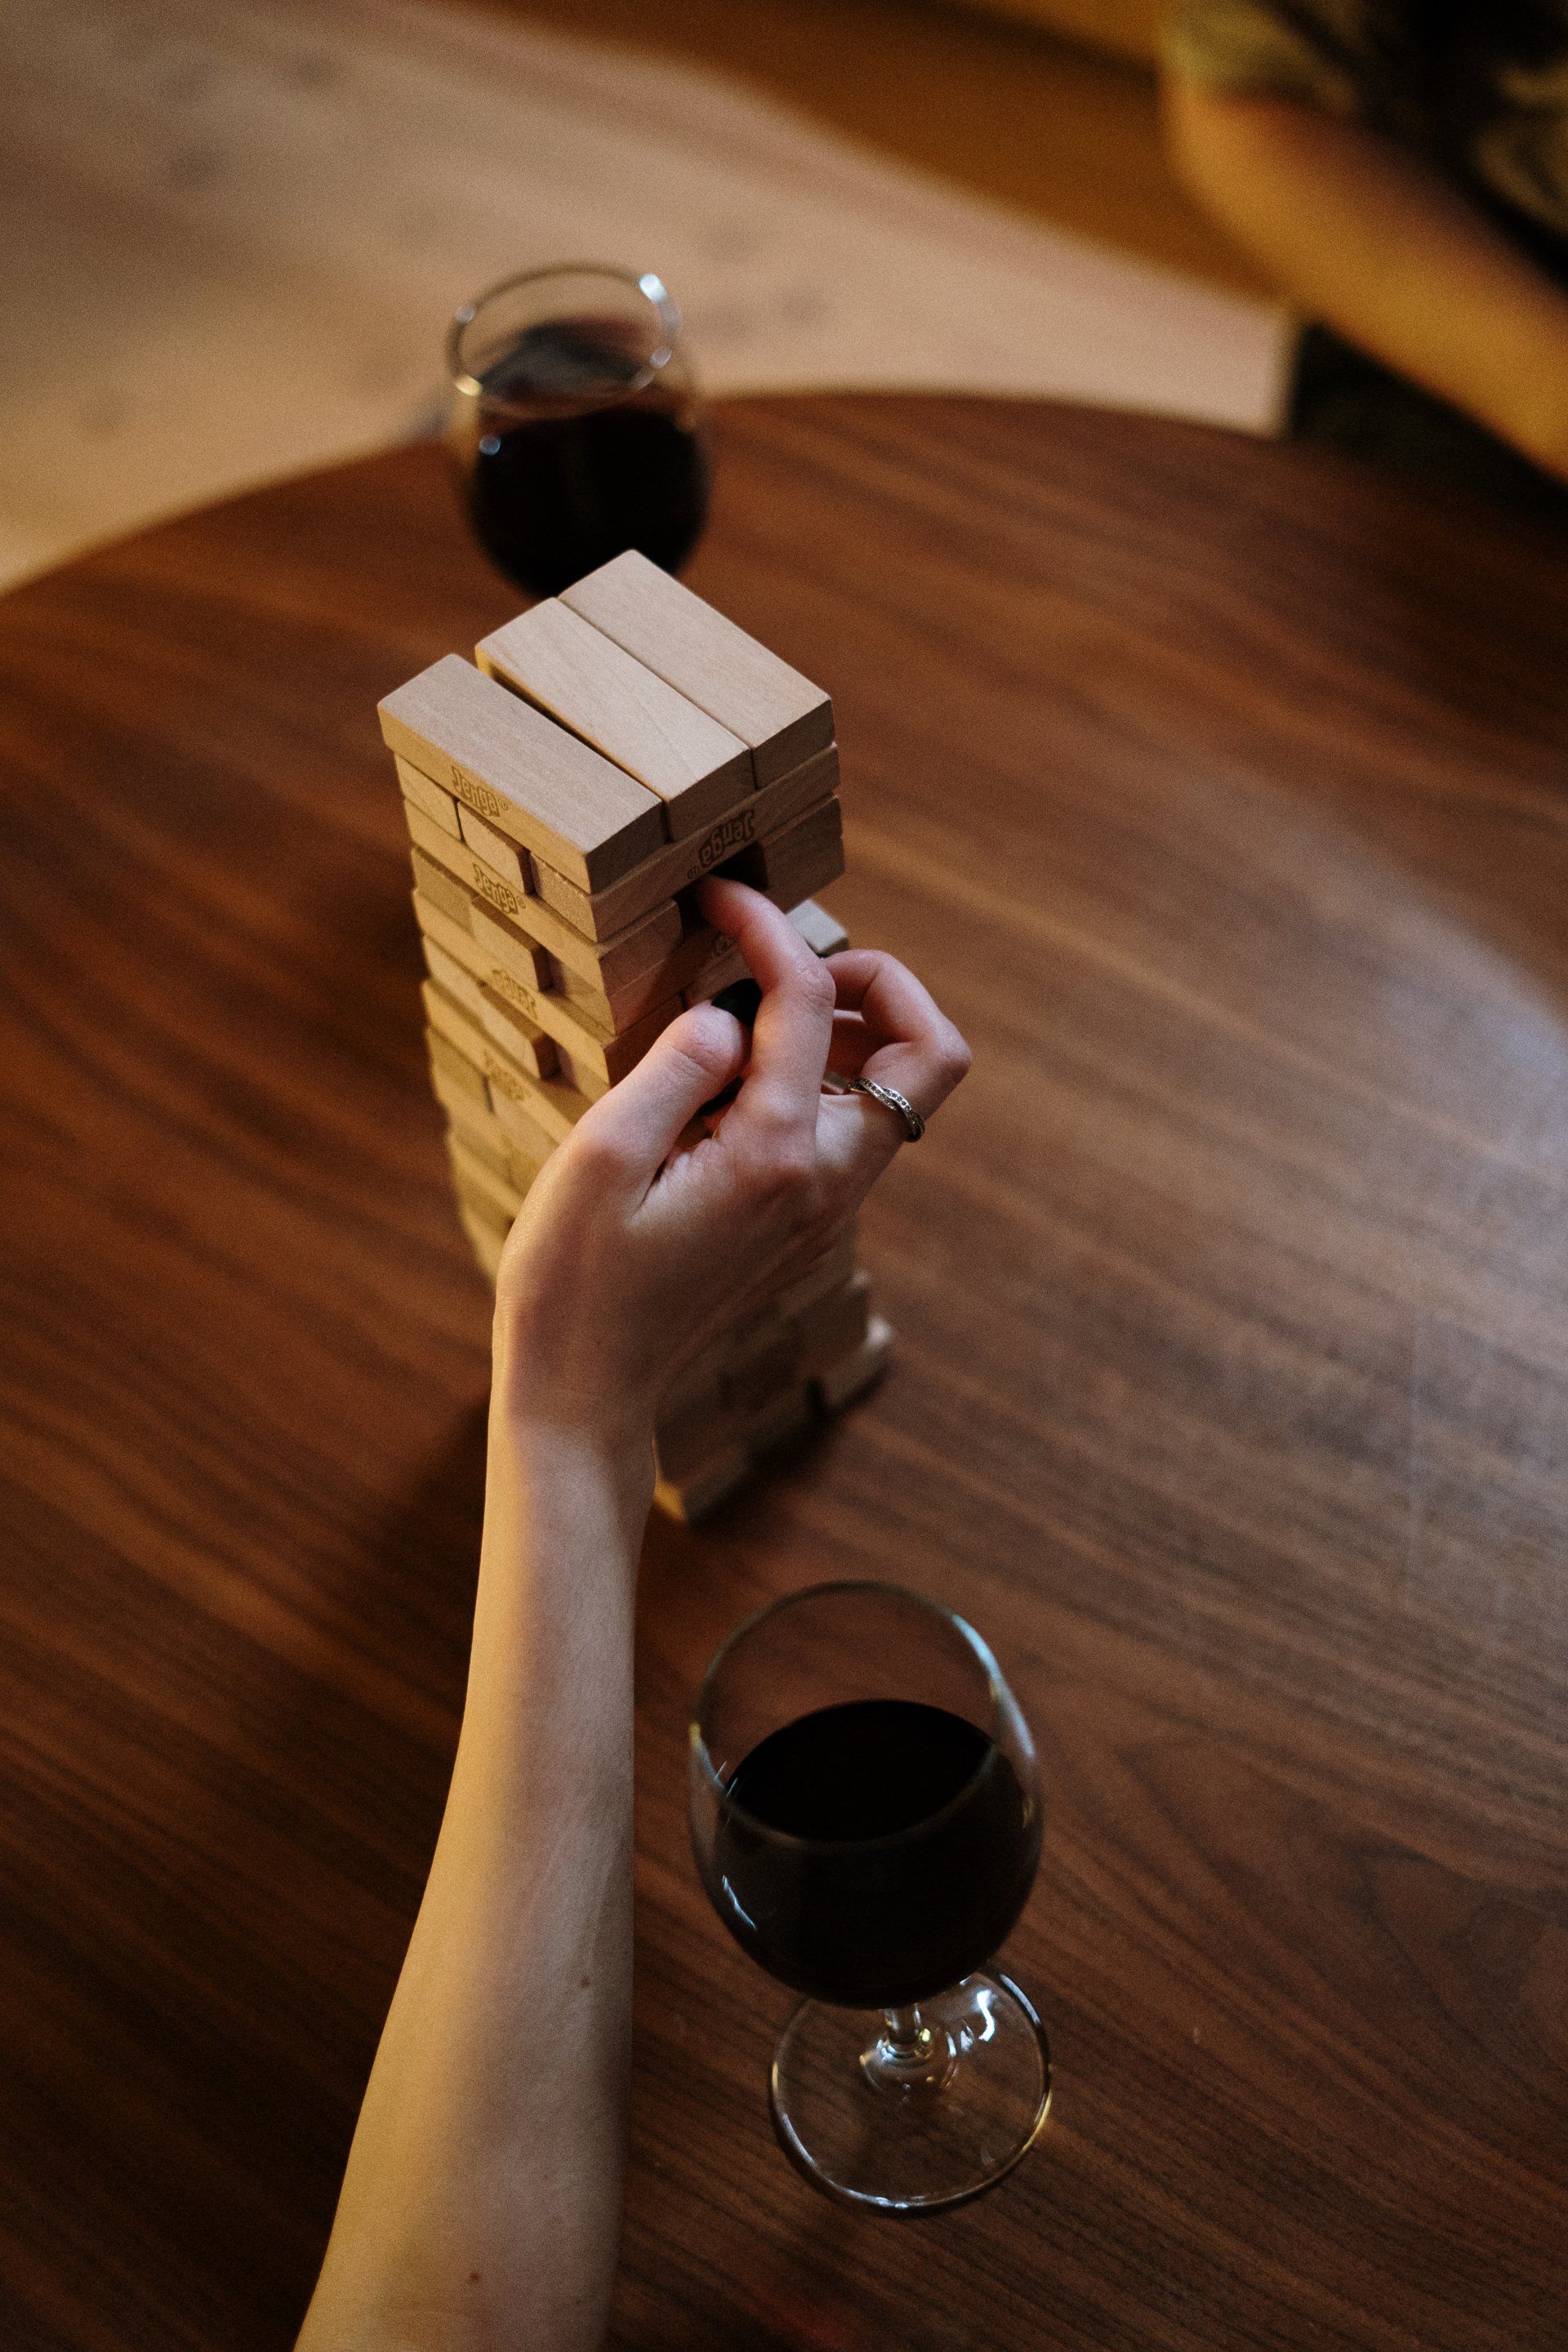 A game of Jenga on a table with someones hand pushing a brick out. A glass of red wine at hand.